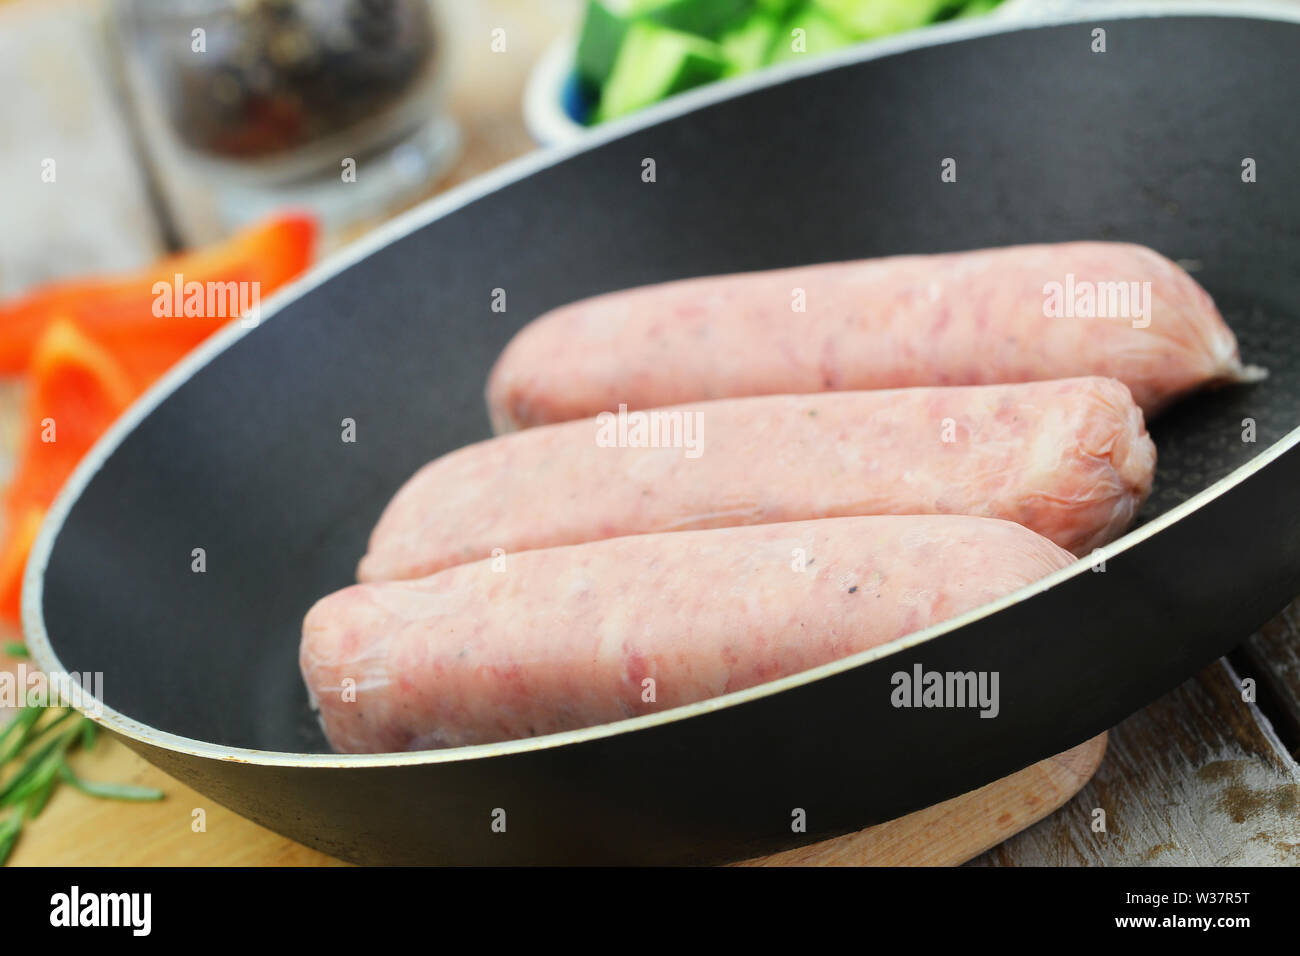 Uncooked British pork sausages in frying pan Stock Photo